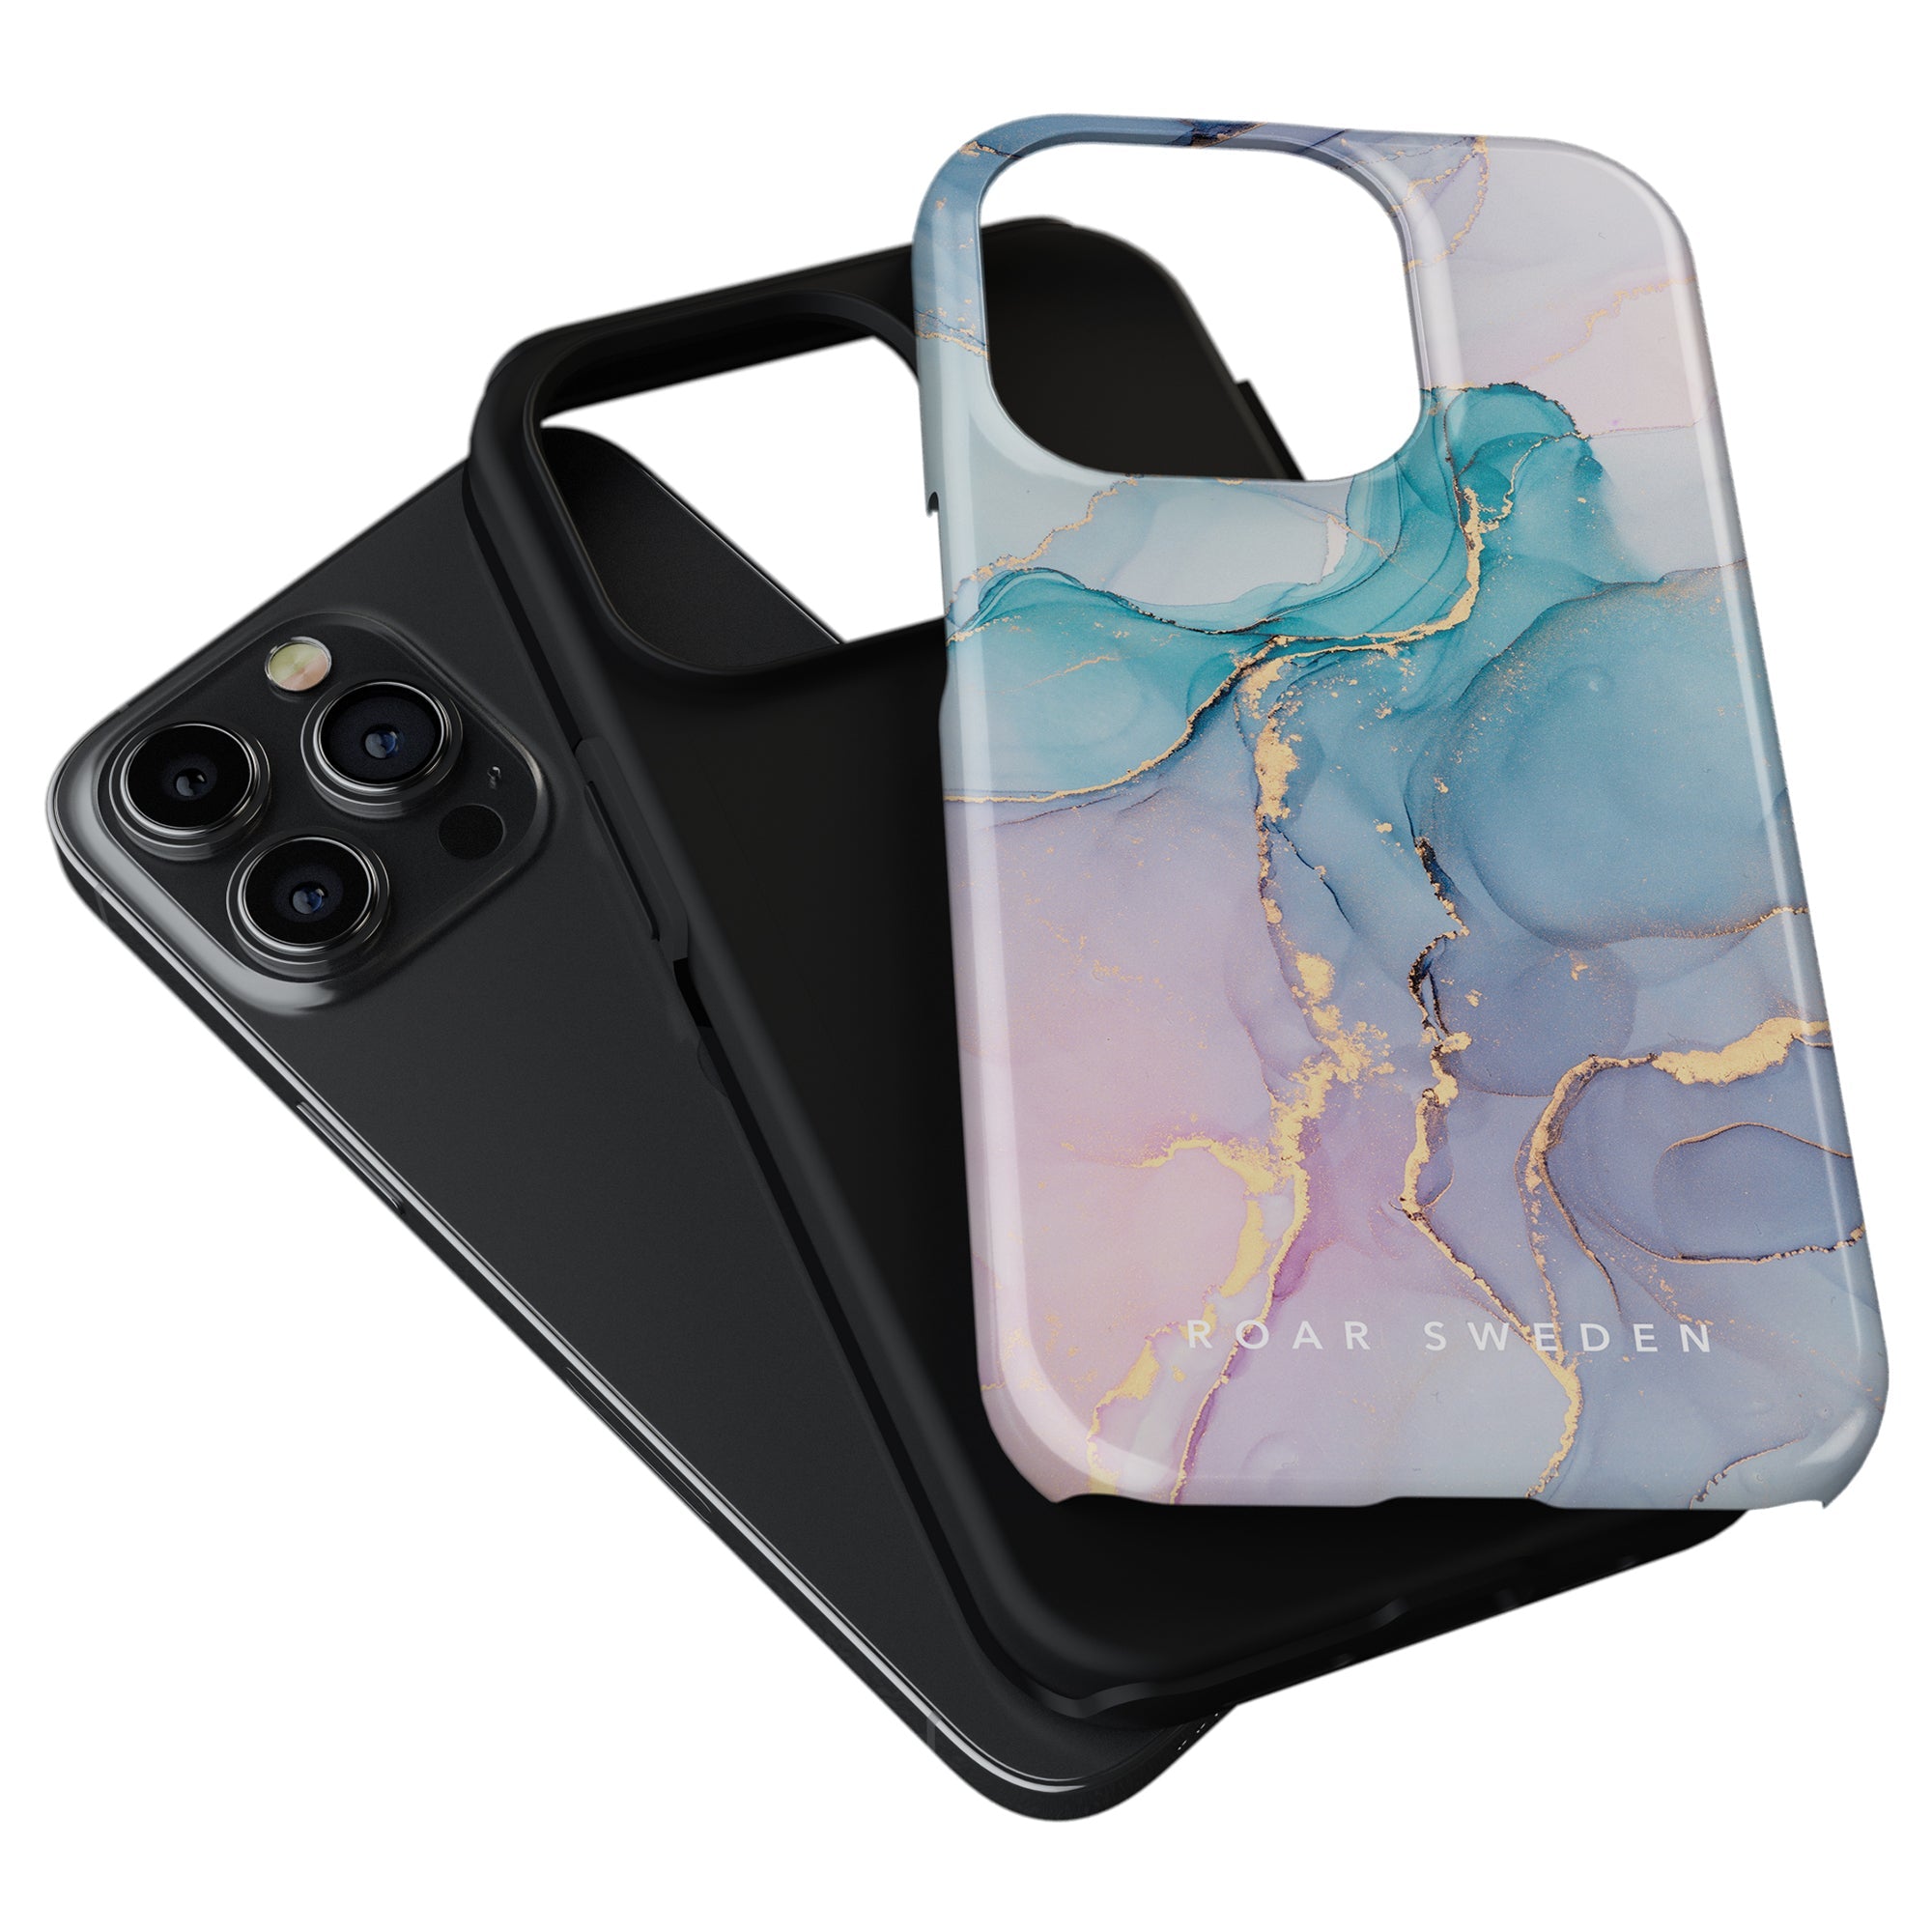 The Swirl - Tough case for the iPhone 11 pro is shown.